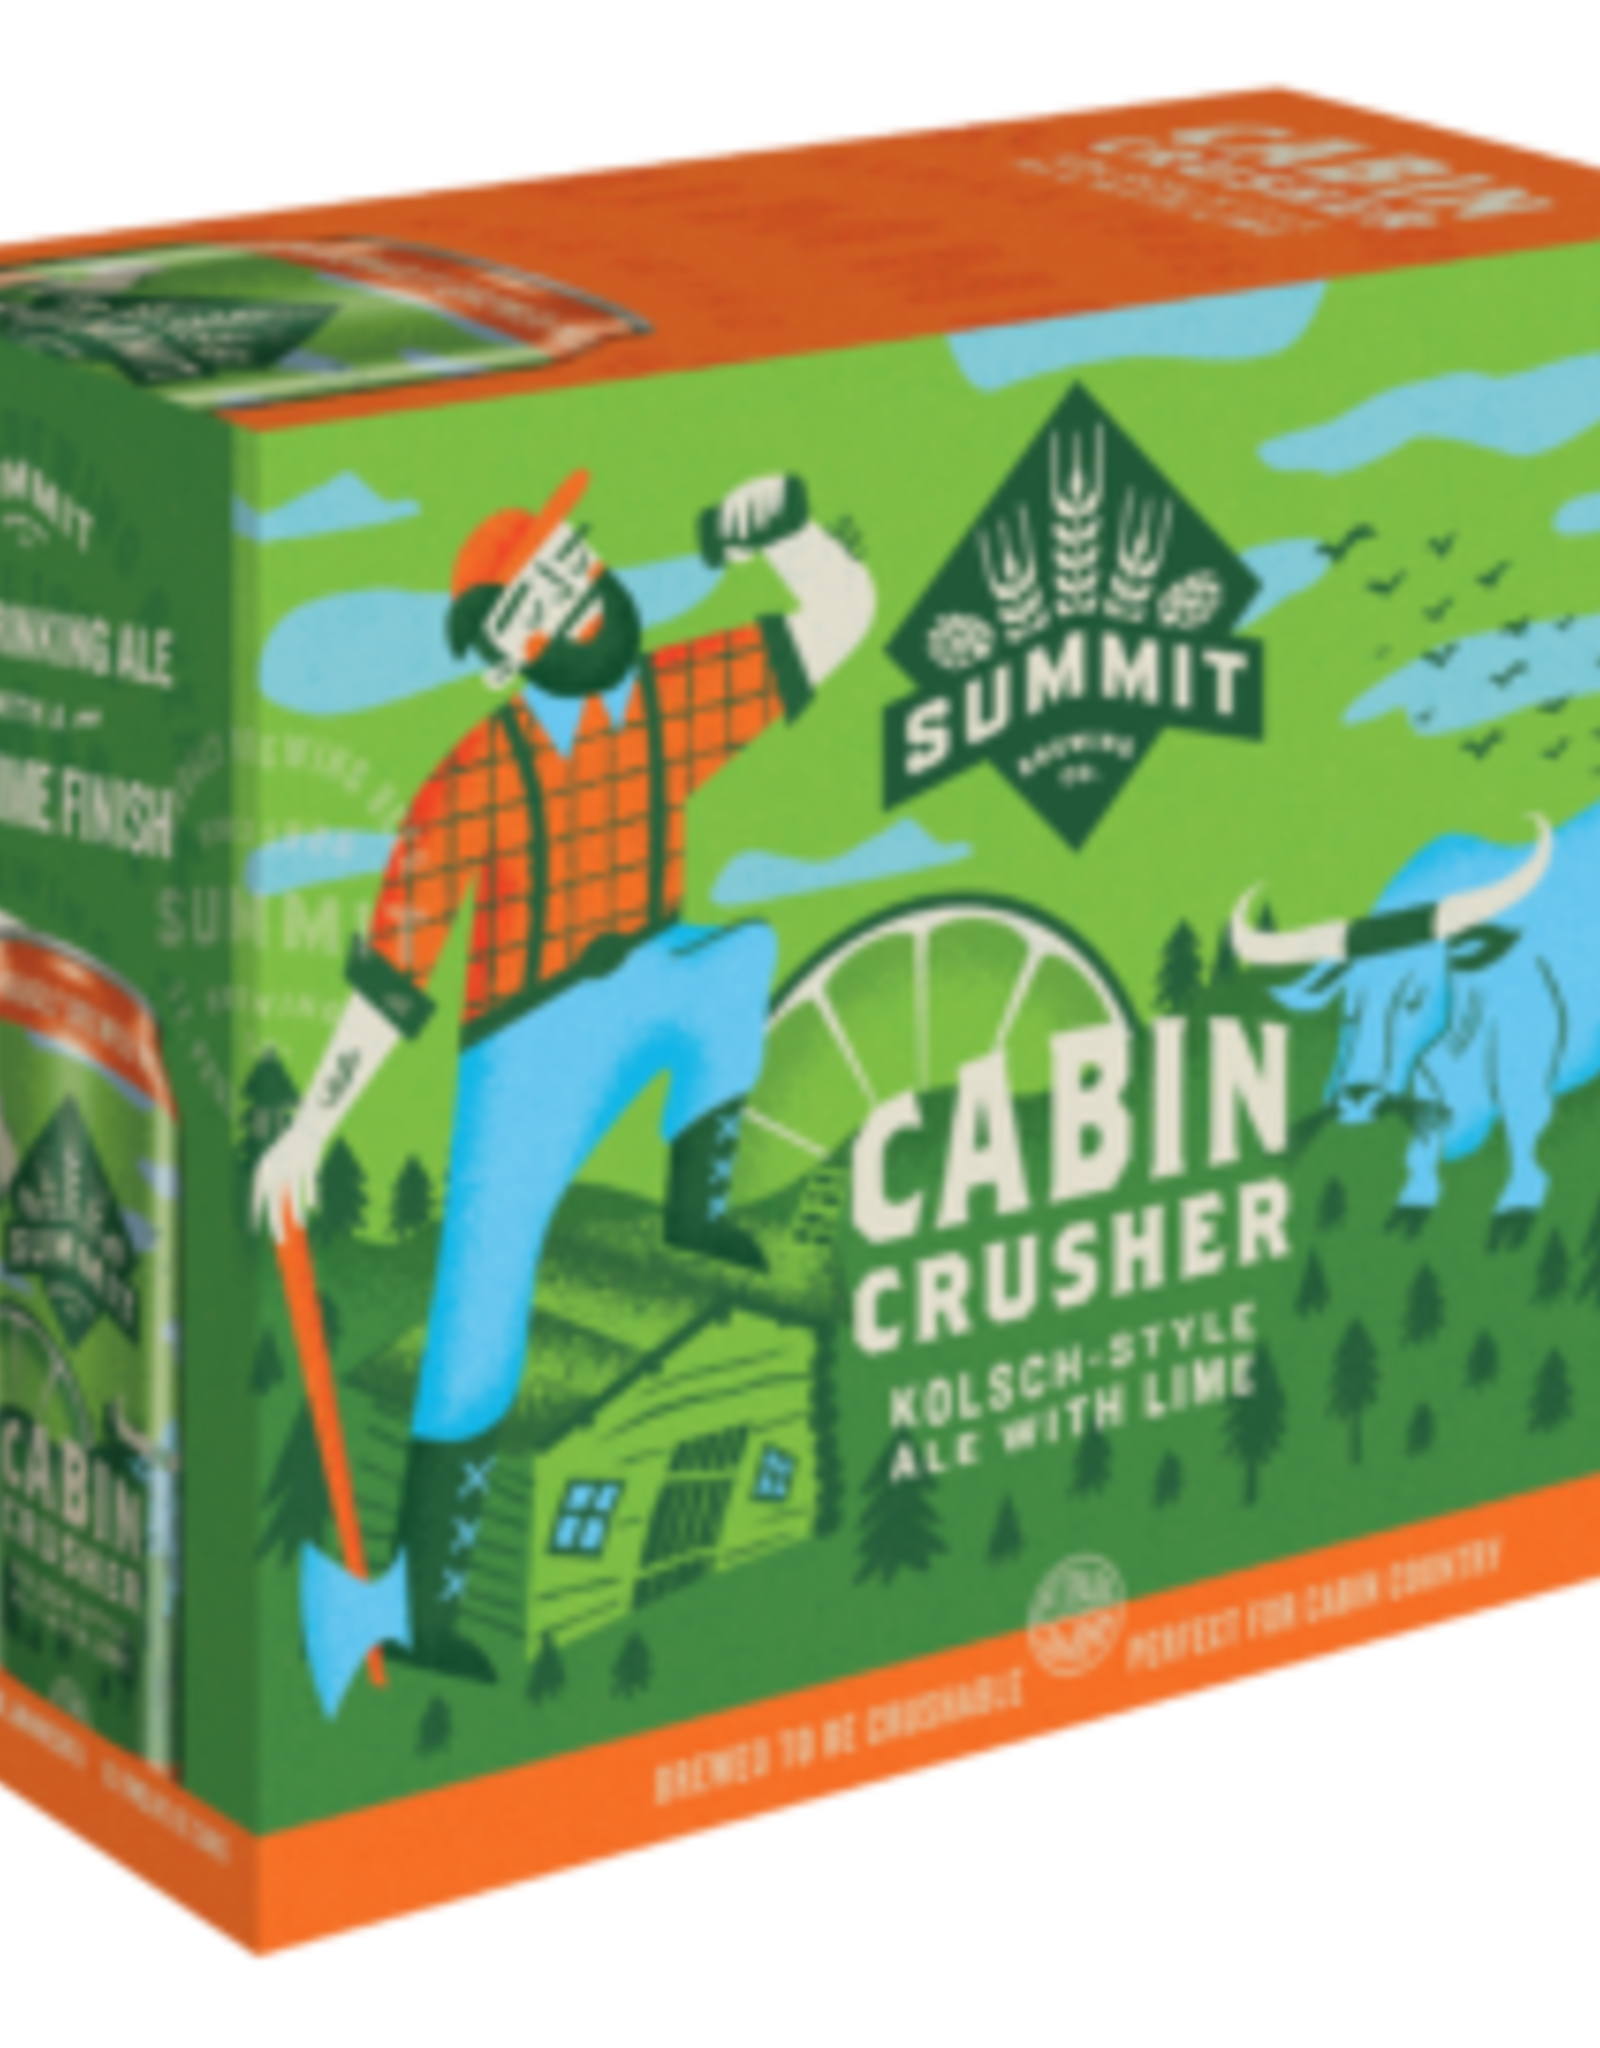 Summit Cabin Crusher 12x12 oz cans